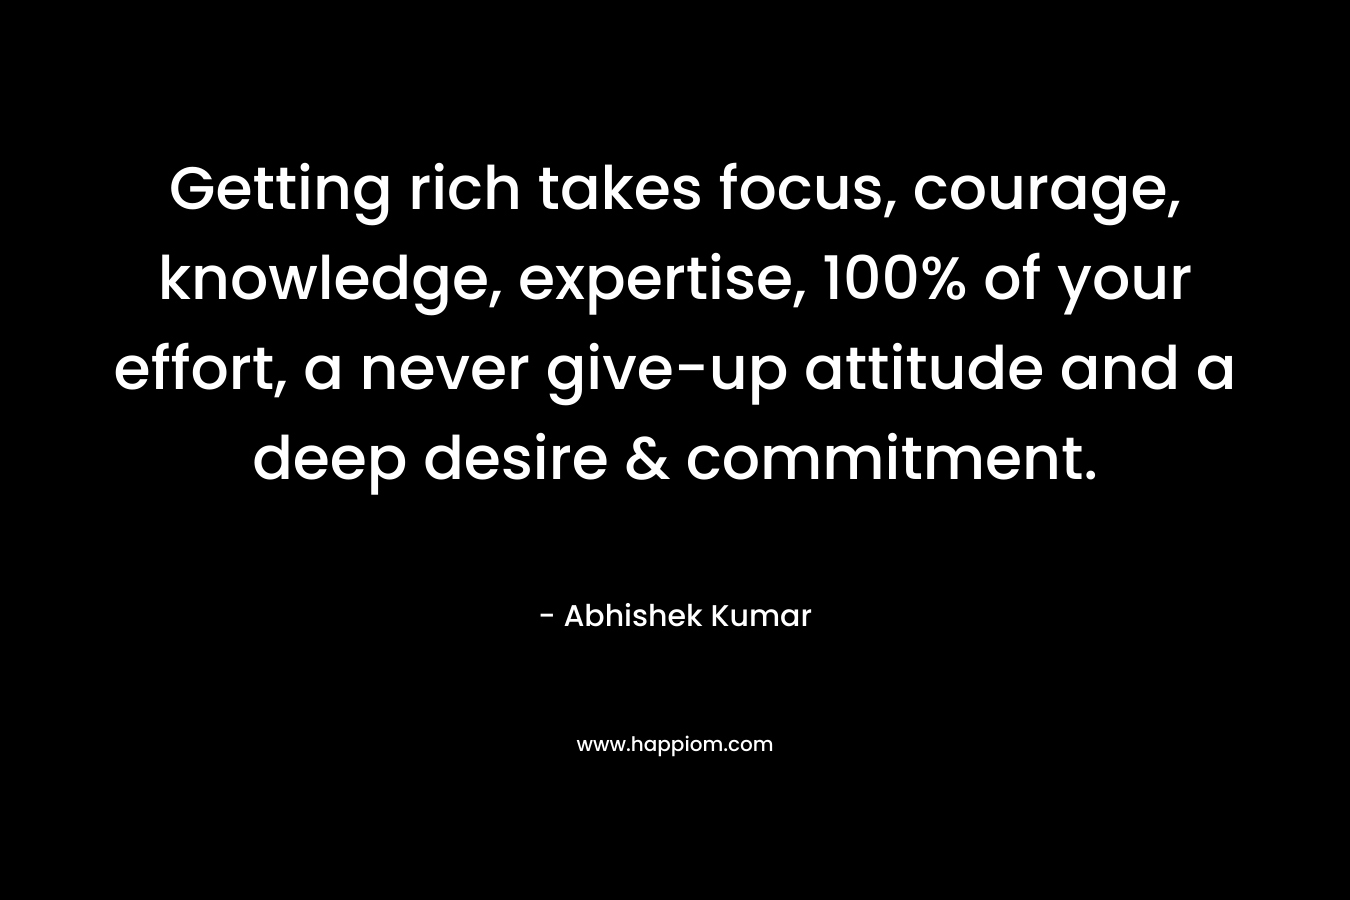 Getting rich takes focus, courage, knowledge, expertise, 100% of your effort, a never give-up attitude and a deep desire & commitment.